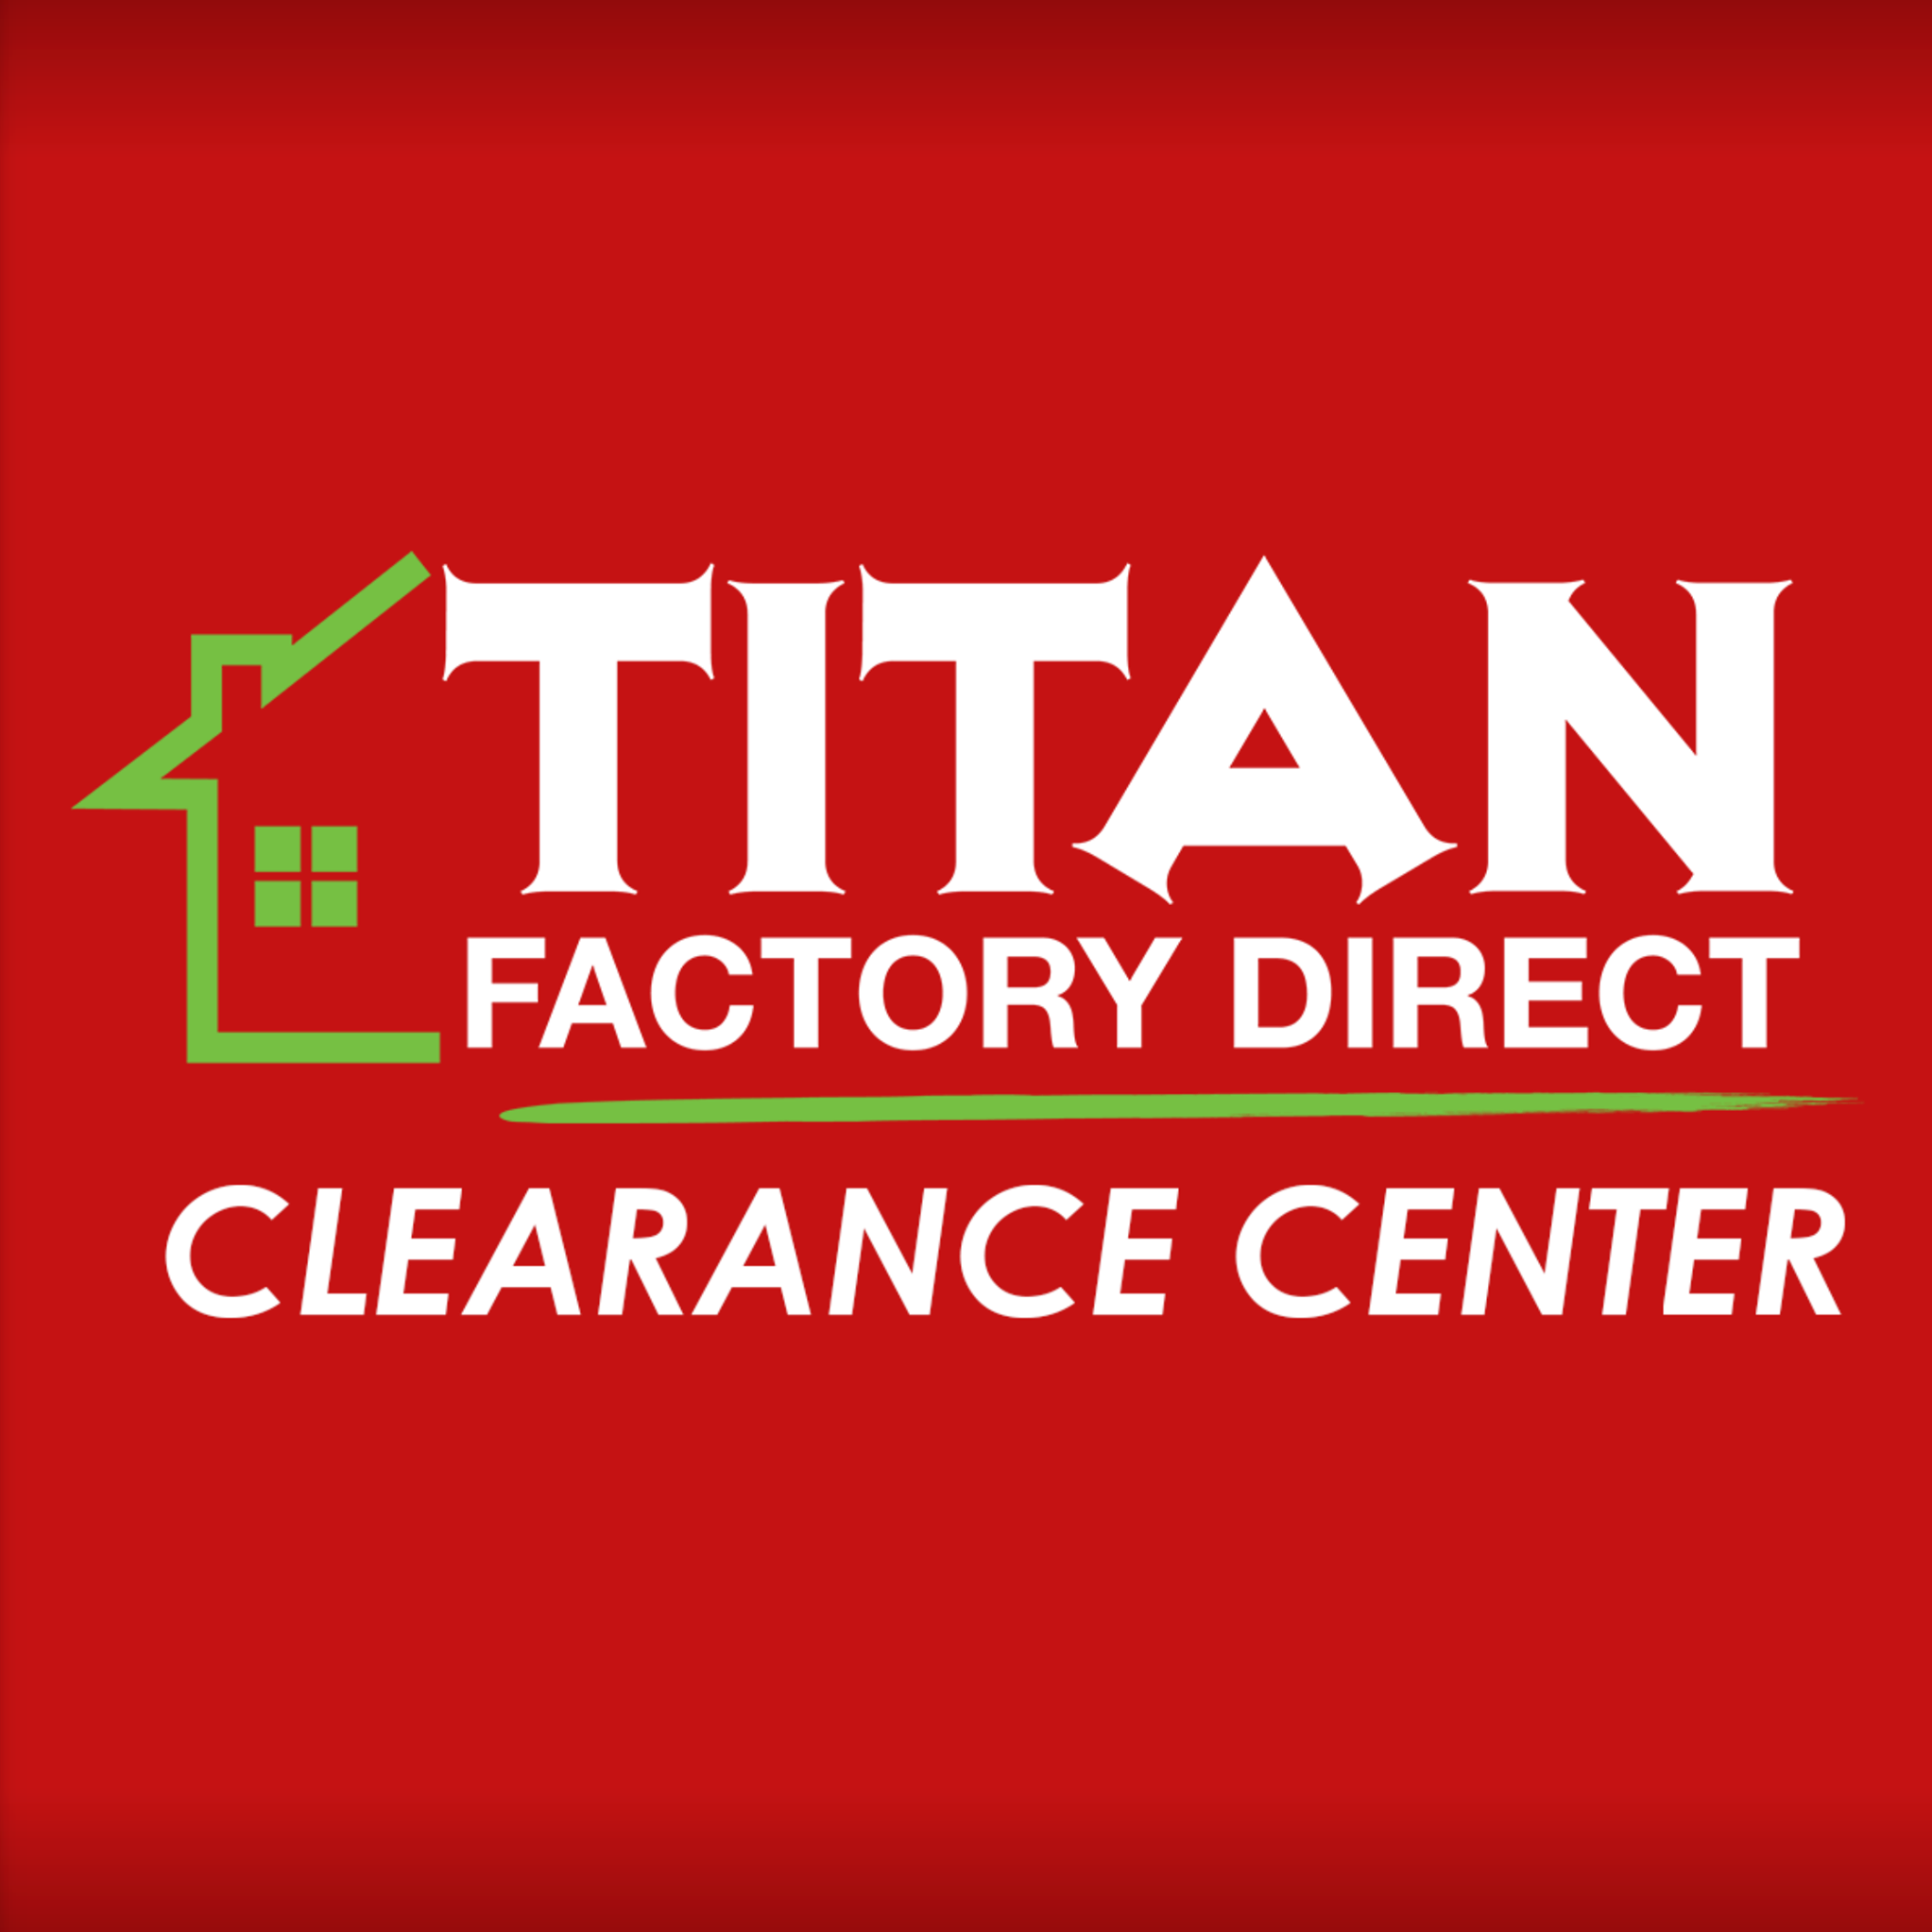 Titan Factory Direct Clearance Center Photo